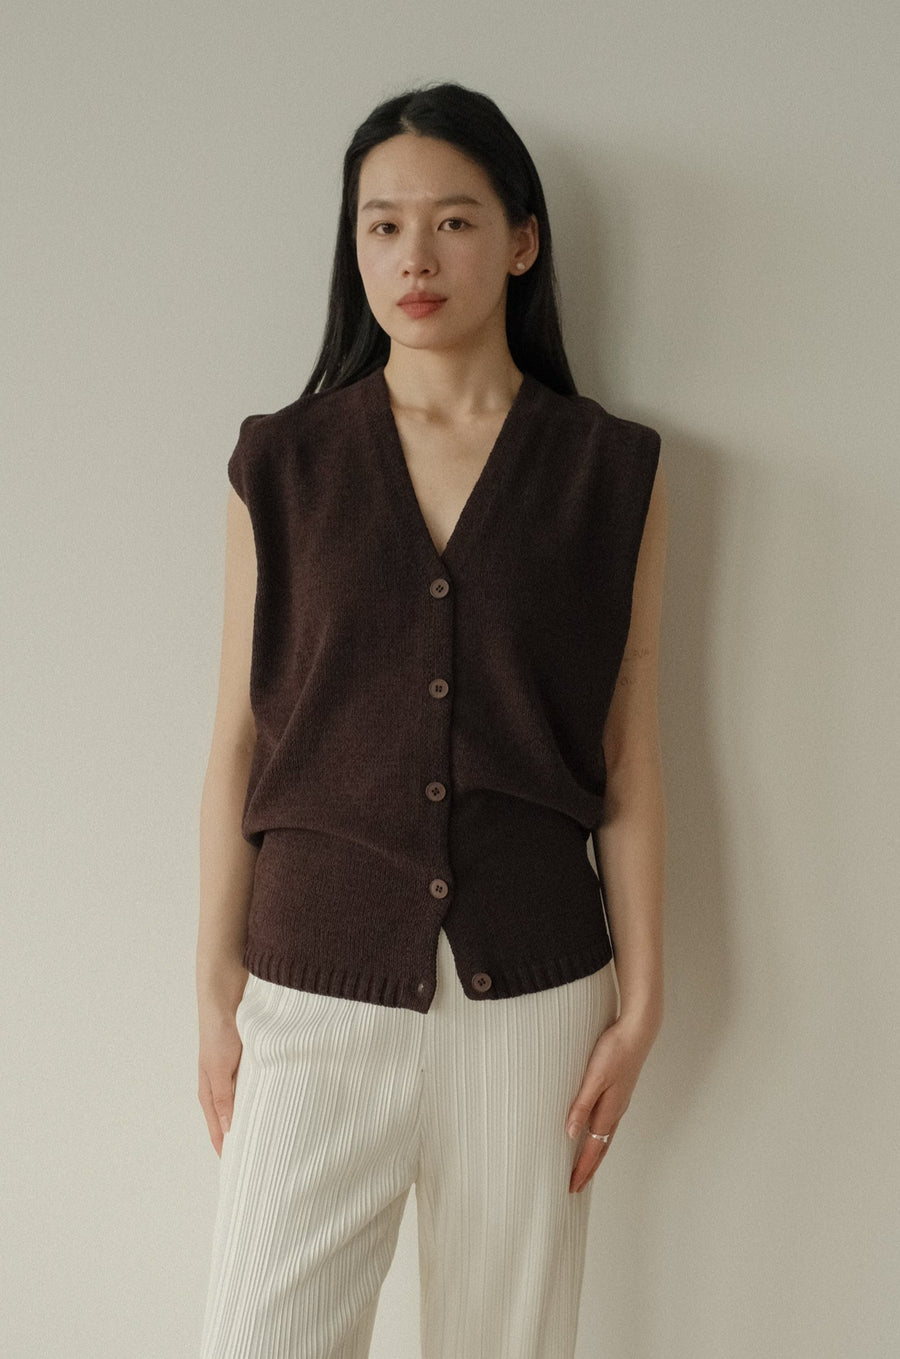 by DOE - Textured Knitted Vest